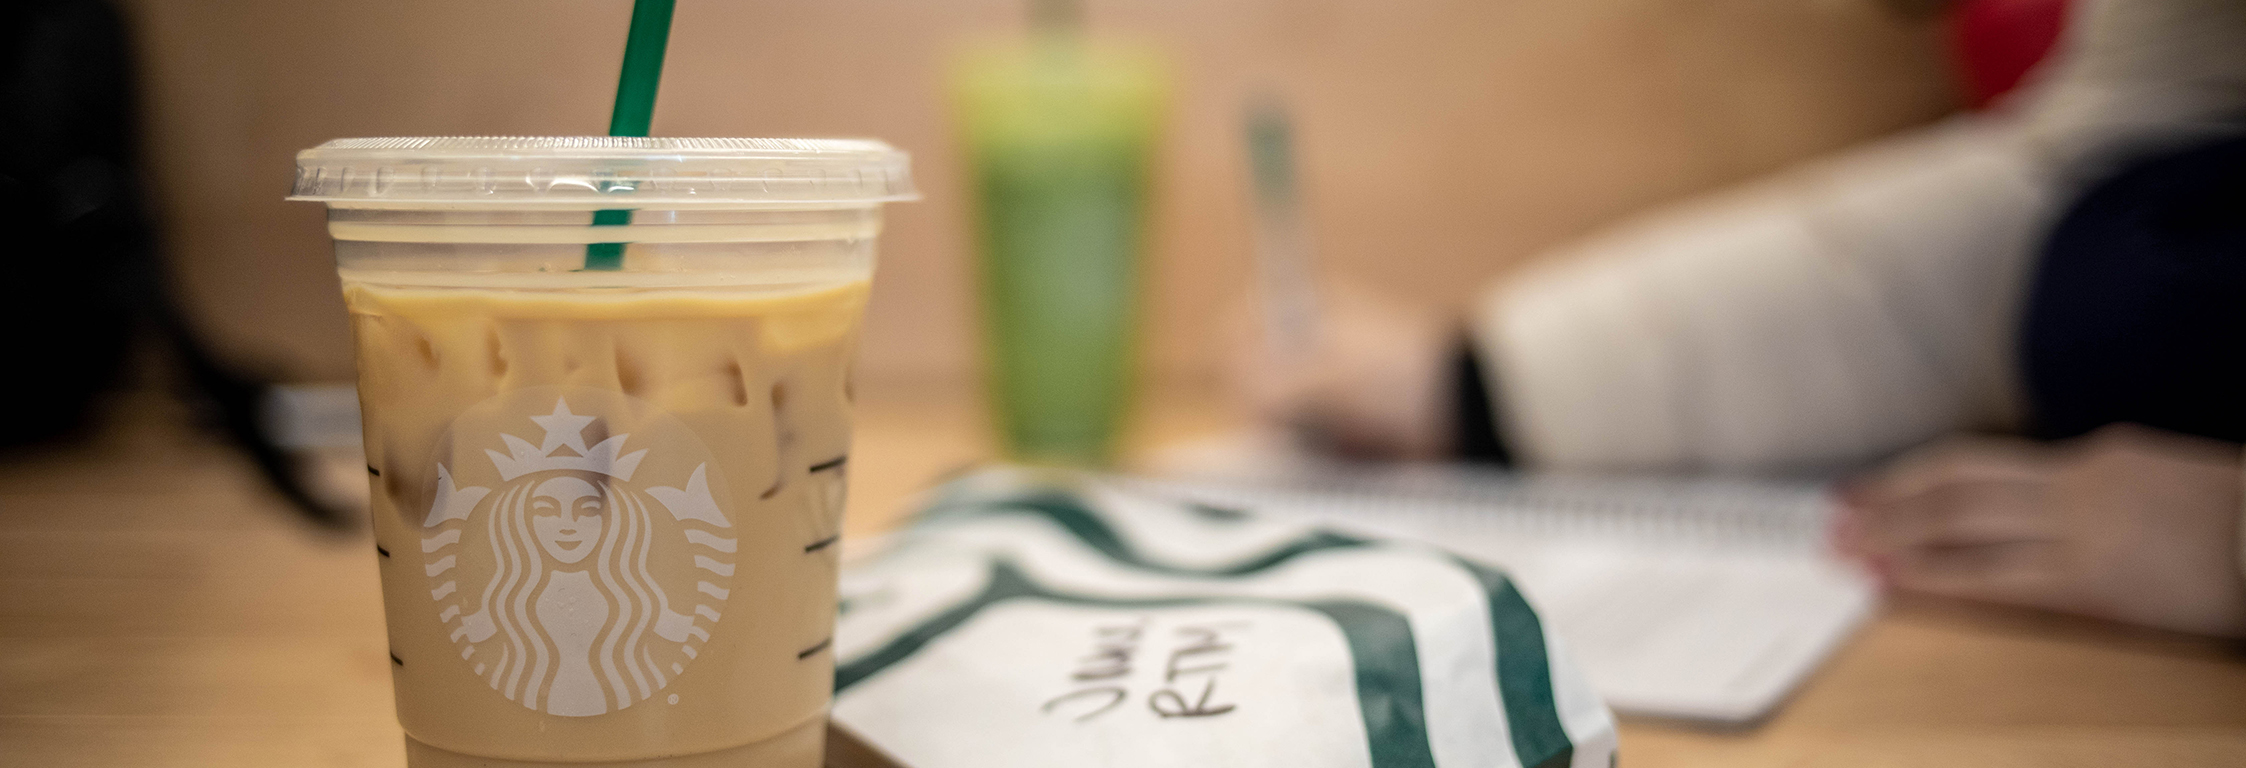 Iced Starbucks drink and wrapped food item sitting on a table. A person writes in the background.